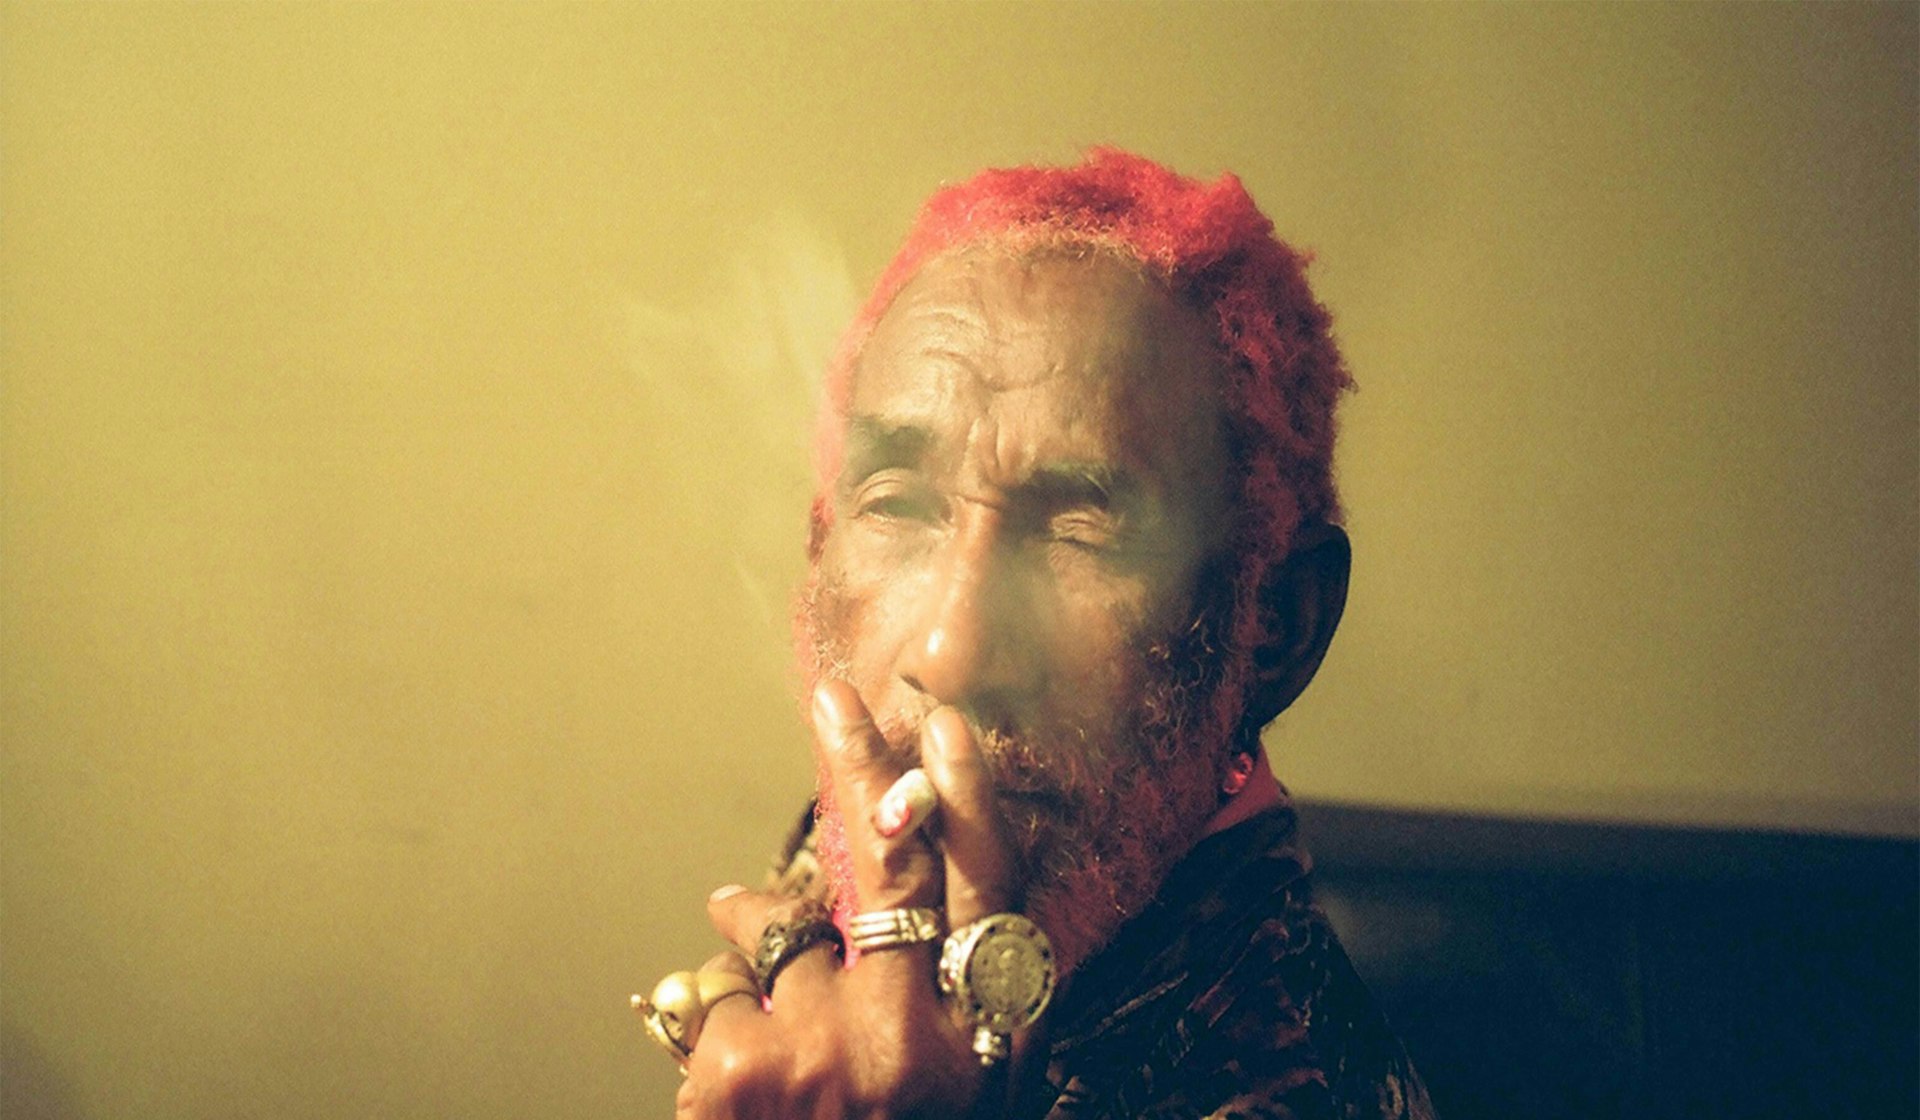 Lee 'Scratch' Perry wants to remind people that he was Tarzan from Africa